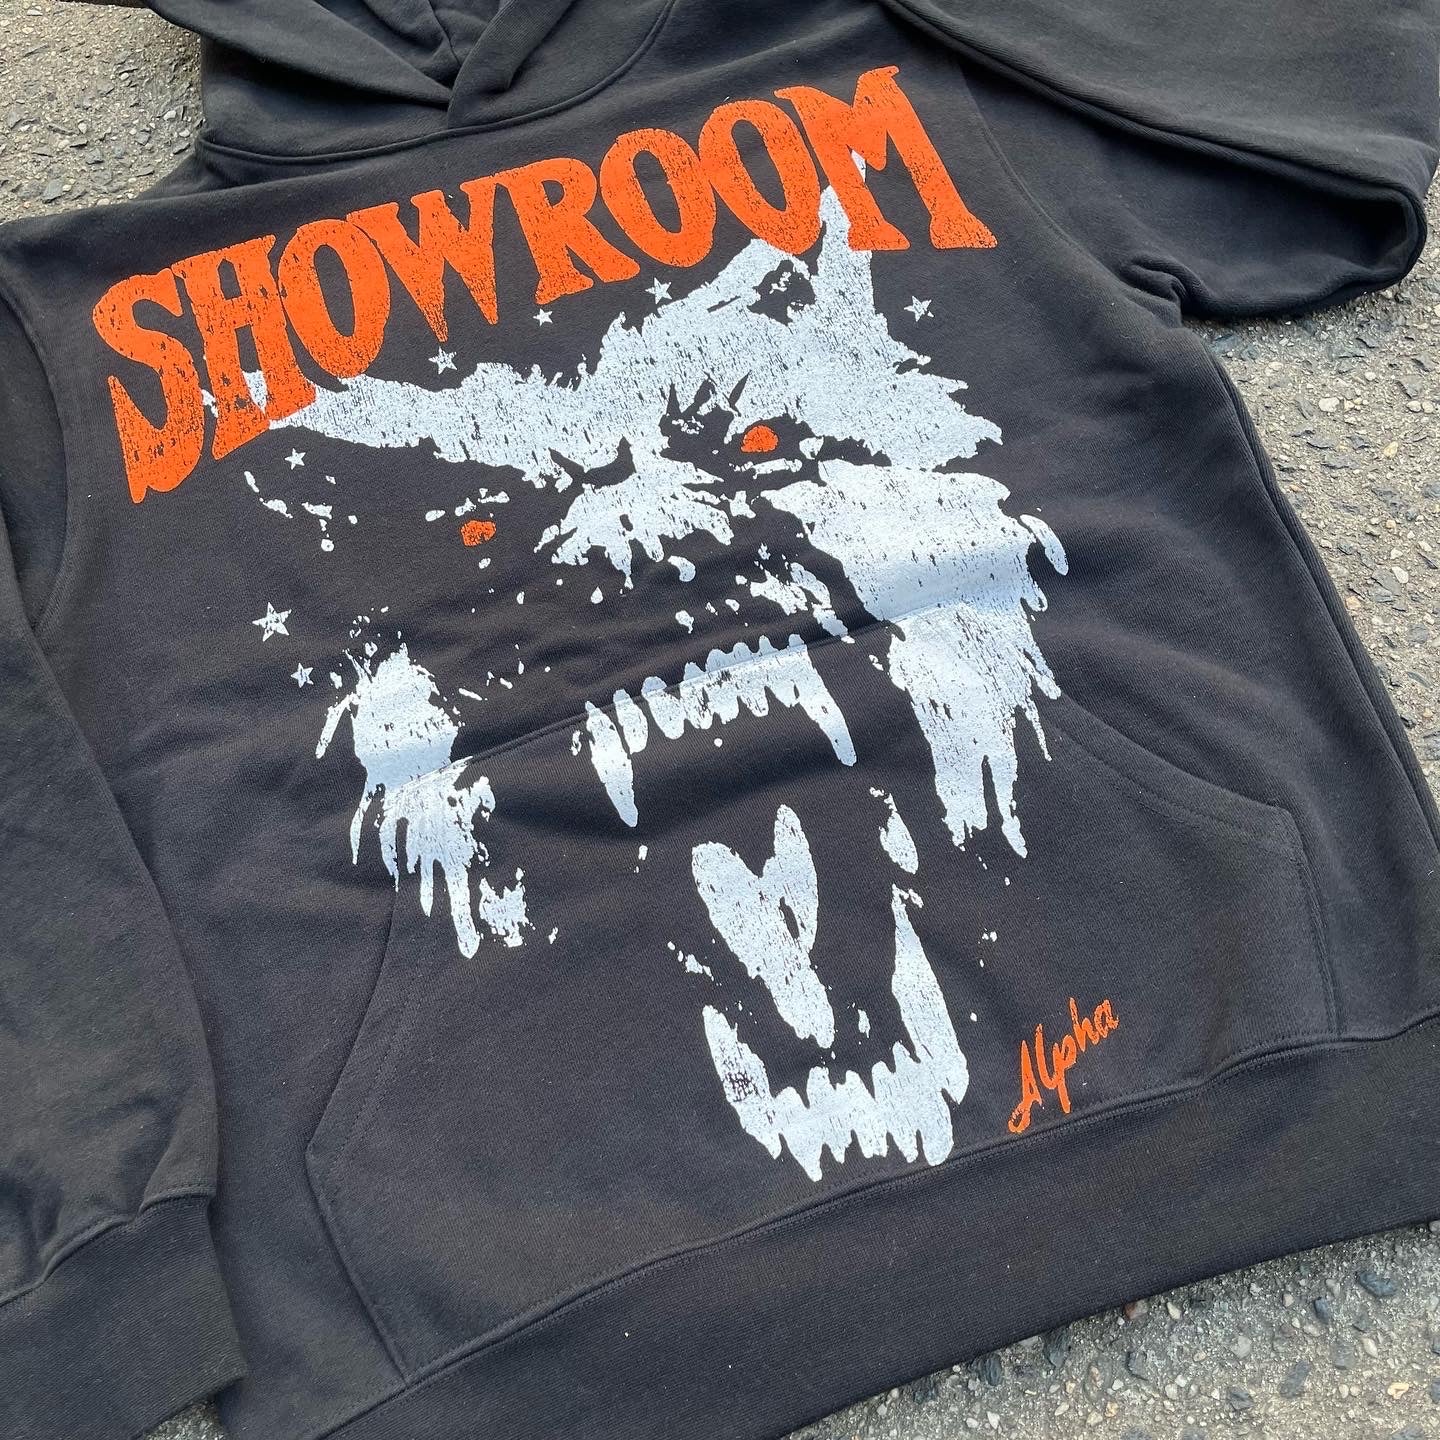 Showroom “For All The Alphas” hoodie